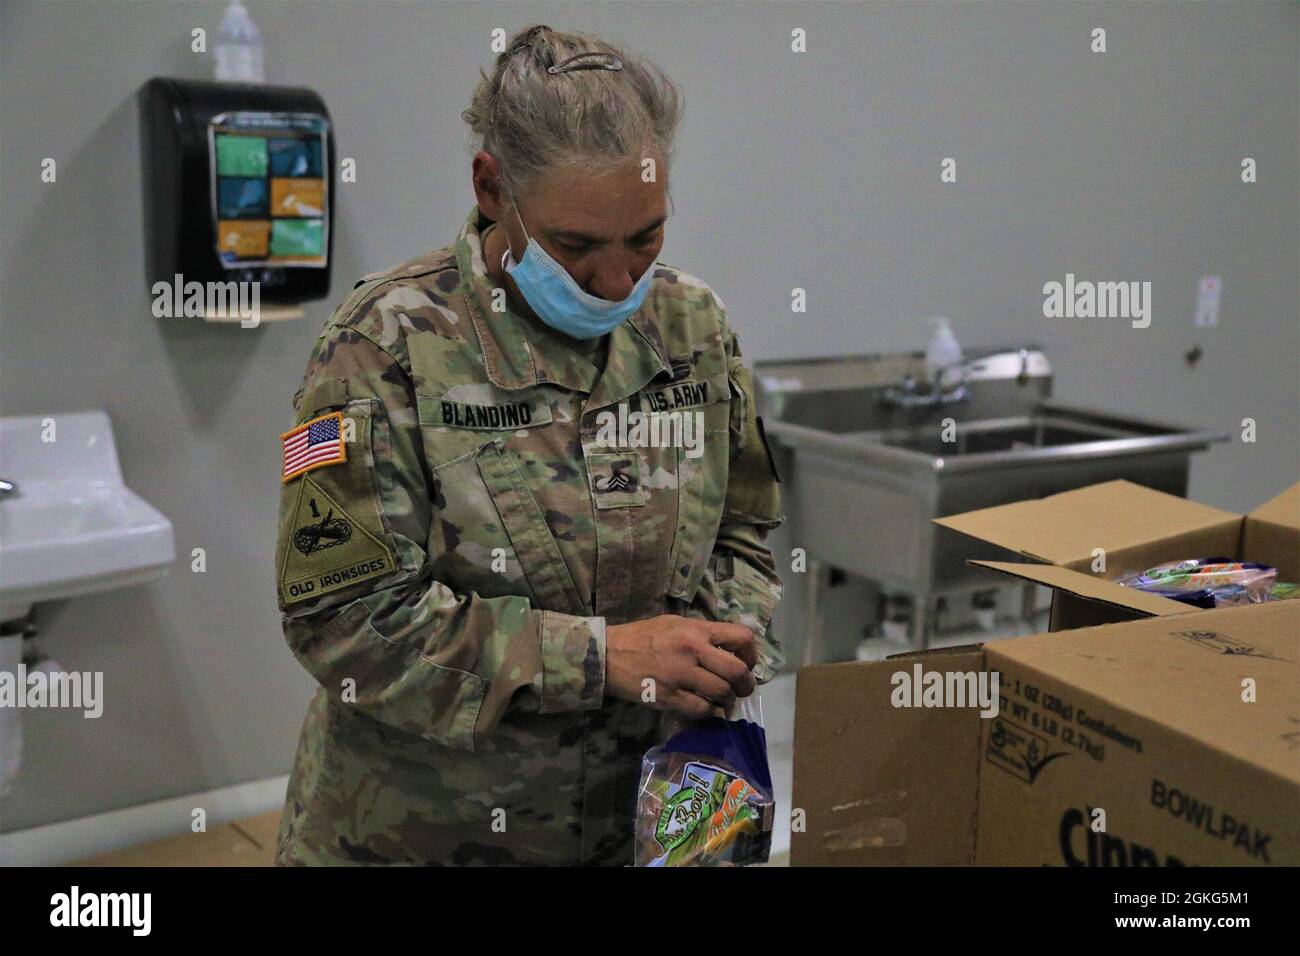 U.S. Army Sgt. Mary Blandino, an automated logistical specialist with the Fort Stewart-based Land Dominance Center, 78th Troop Command, Georgia Army National Guard packs a box of food April 14, 2021, at America’s Second Harvest of Coastal Georgia food bank in Savannah, Georgia. Georgia Guardsmen provided support to food banks across the state to help citizens in need during the COVID-19 pandemic. Stock Photo